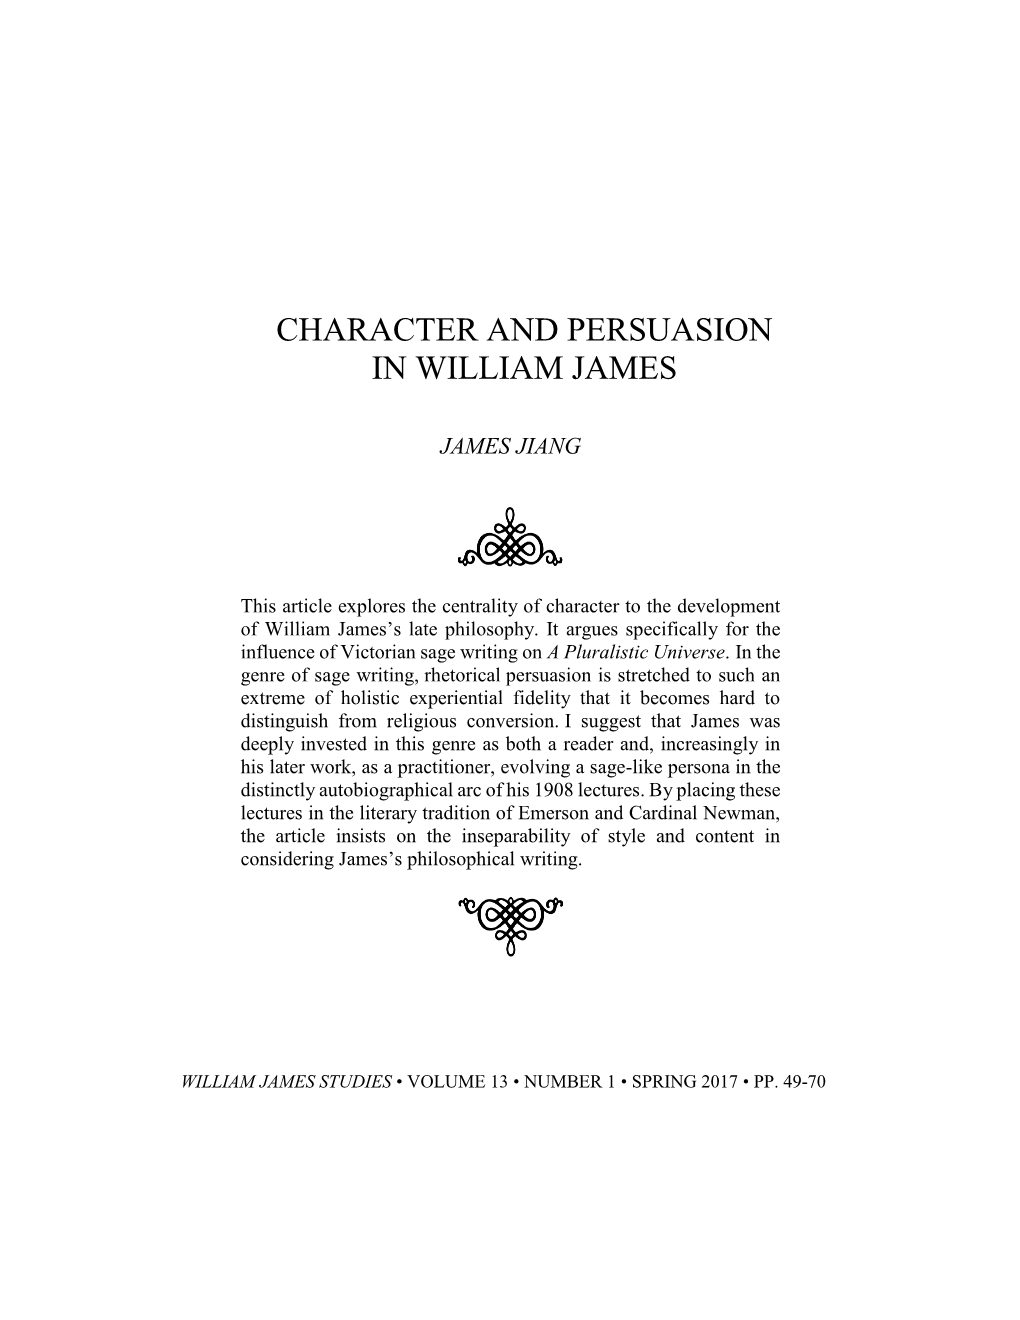 Character and Persuasion in William James